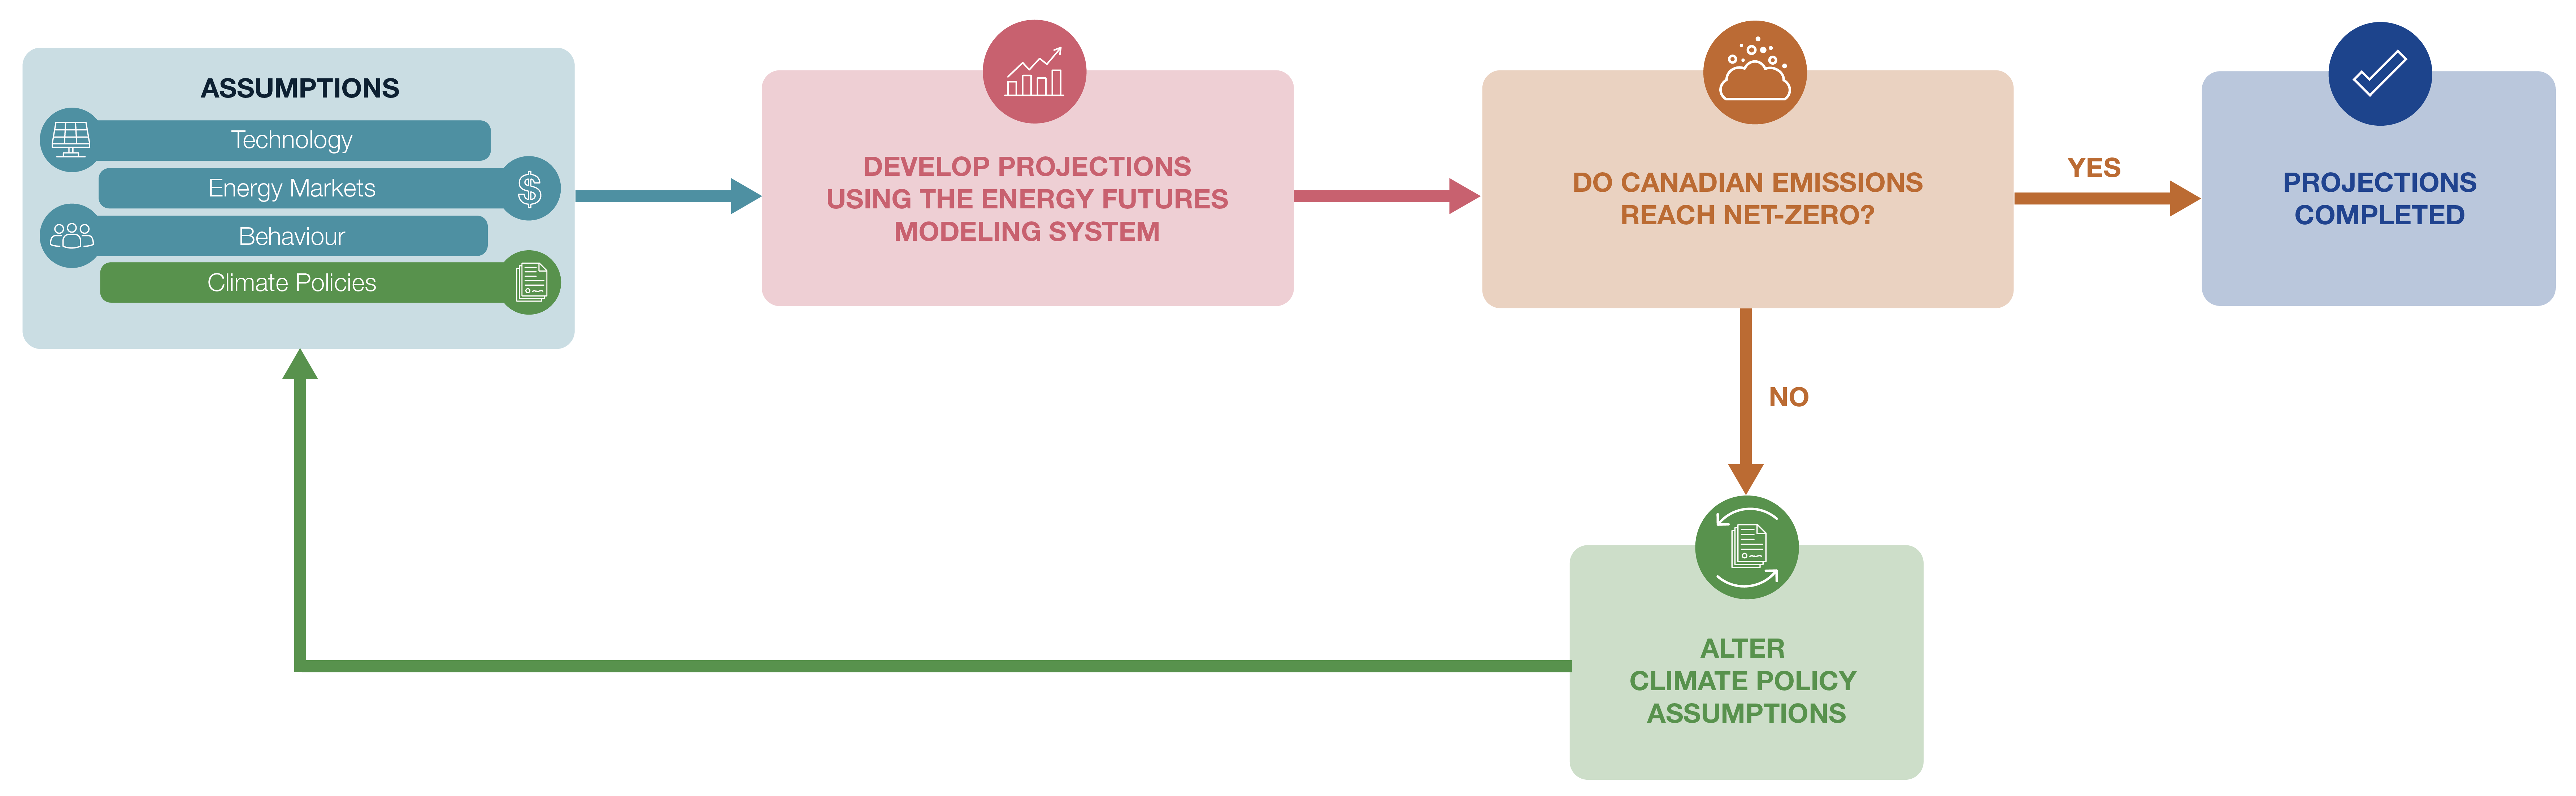 Simplified iterative approach to modeling net-zero in the Global and Canada Net-zero scenarios